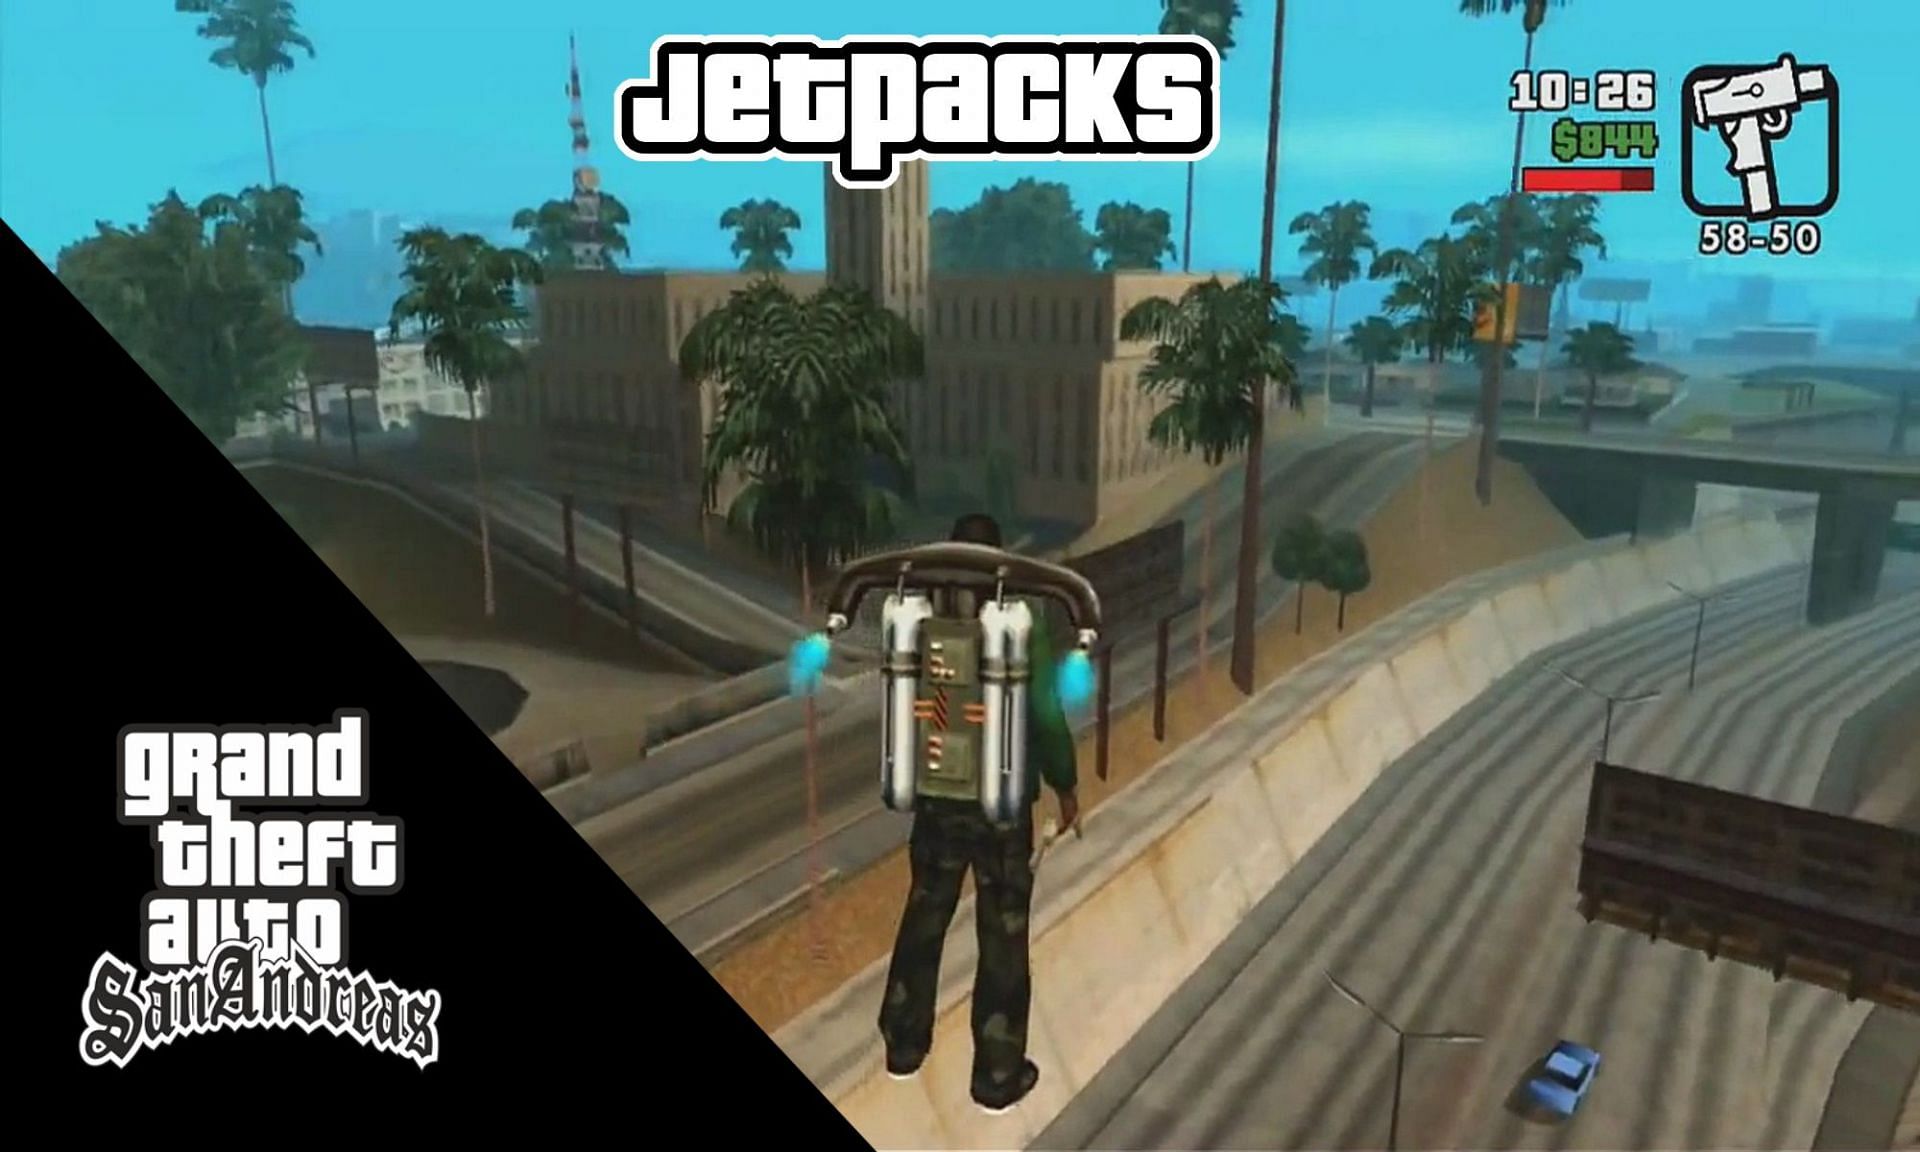 What places can GTA San Andreas players can use the jetpack to reach?